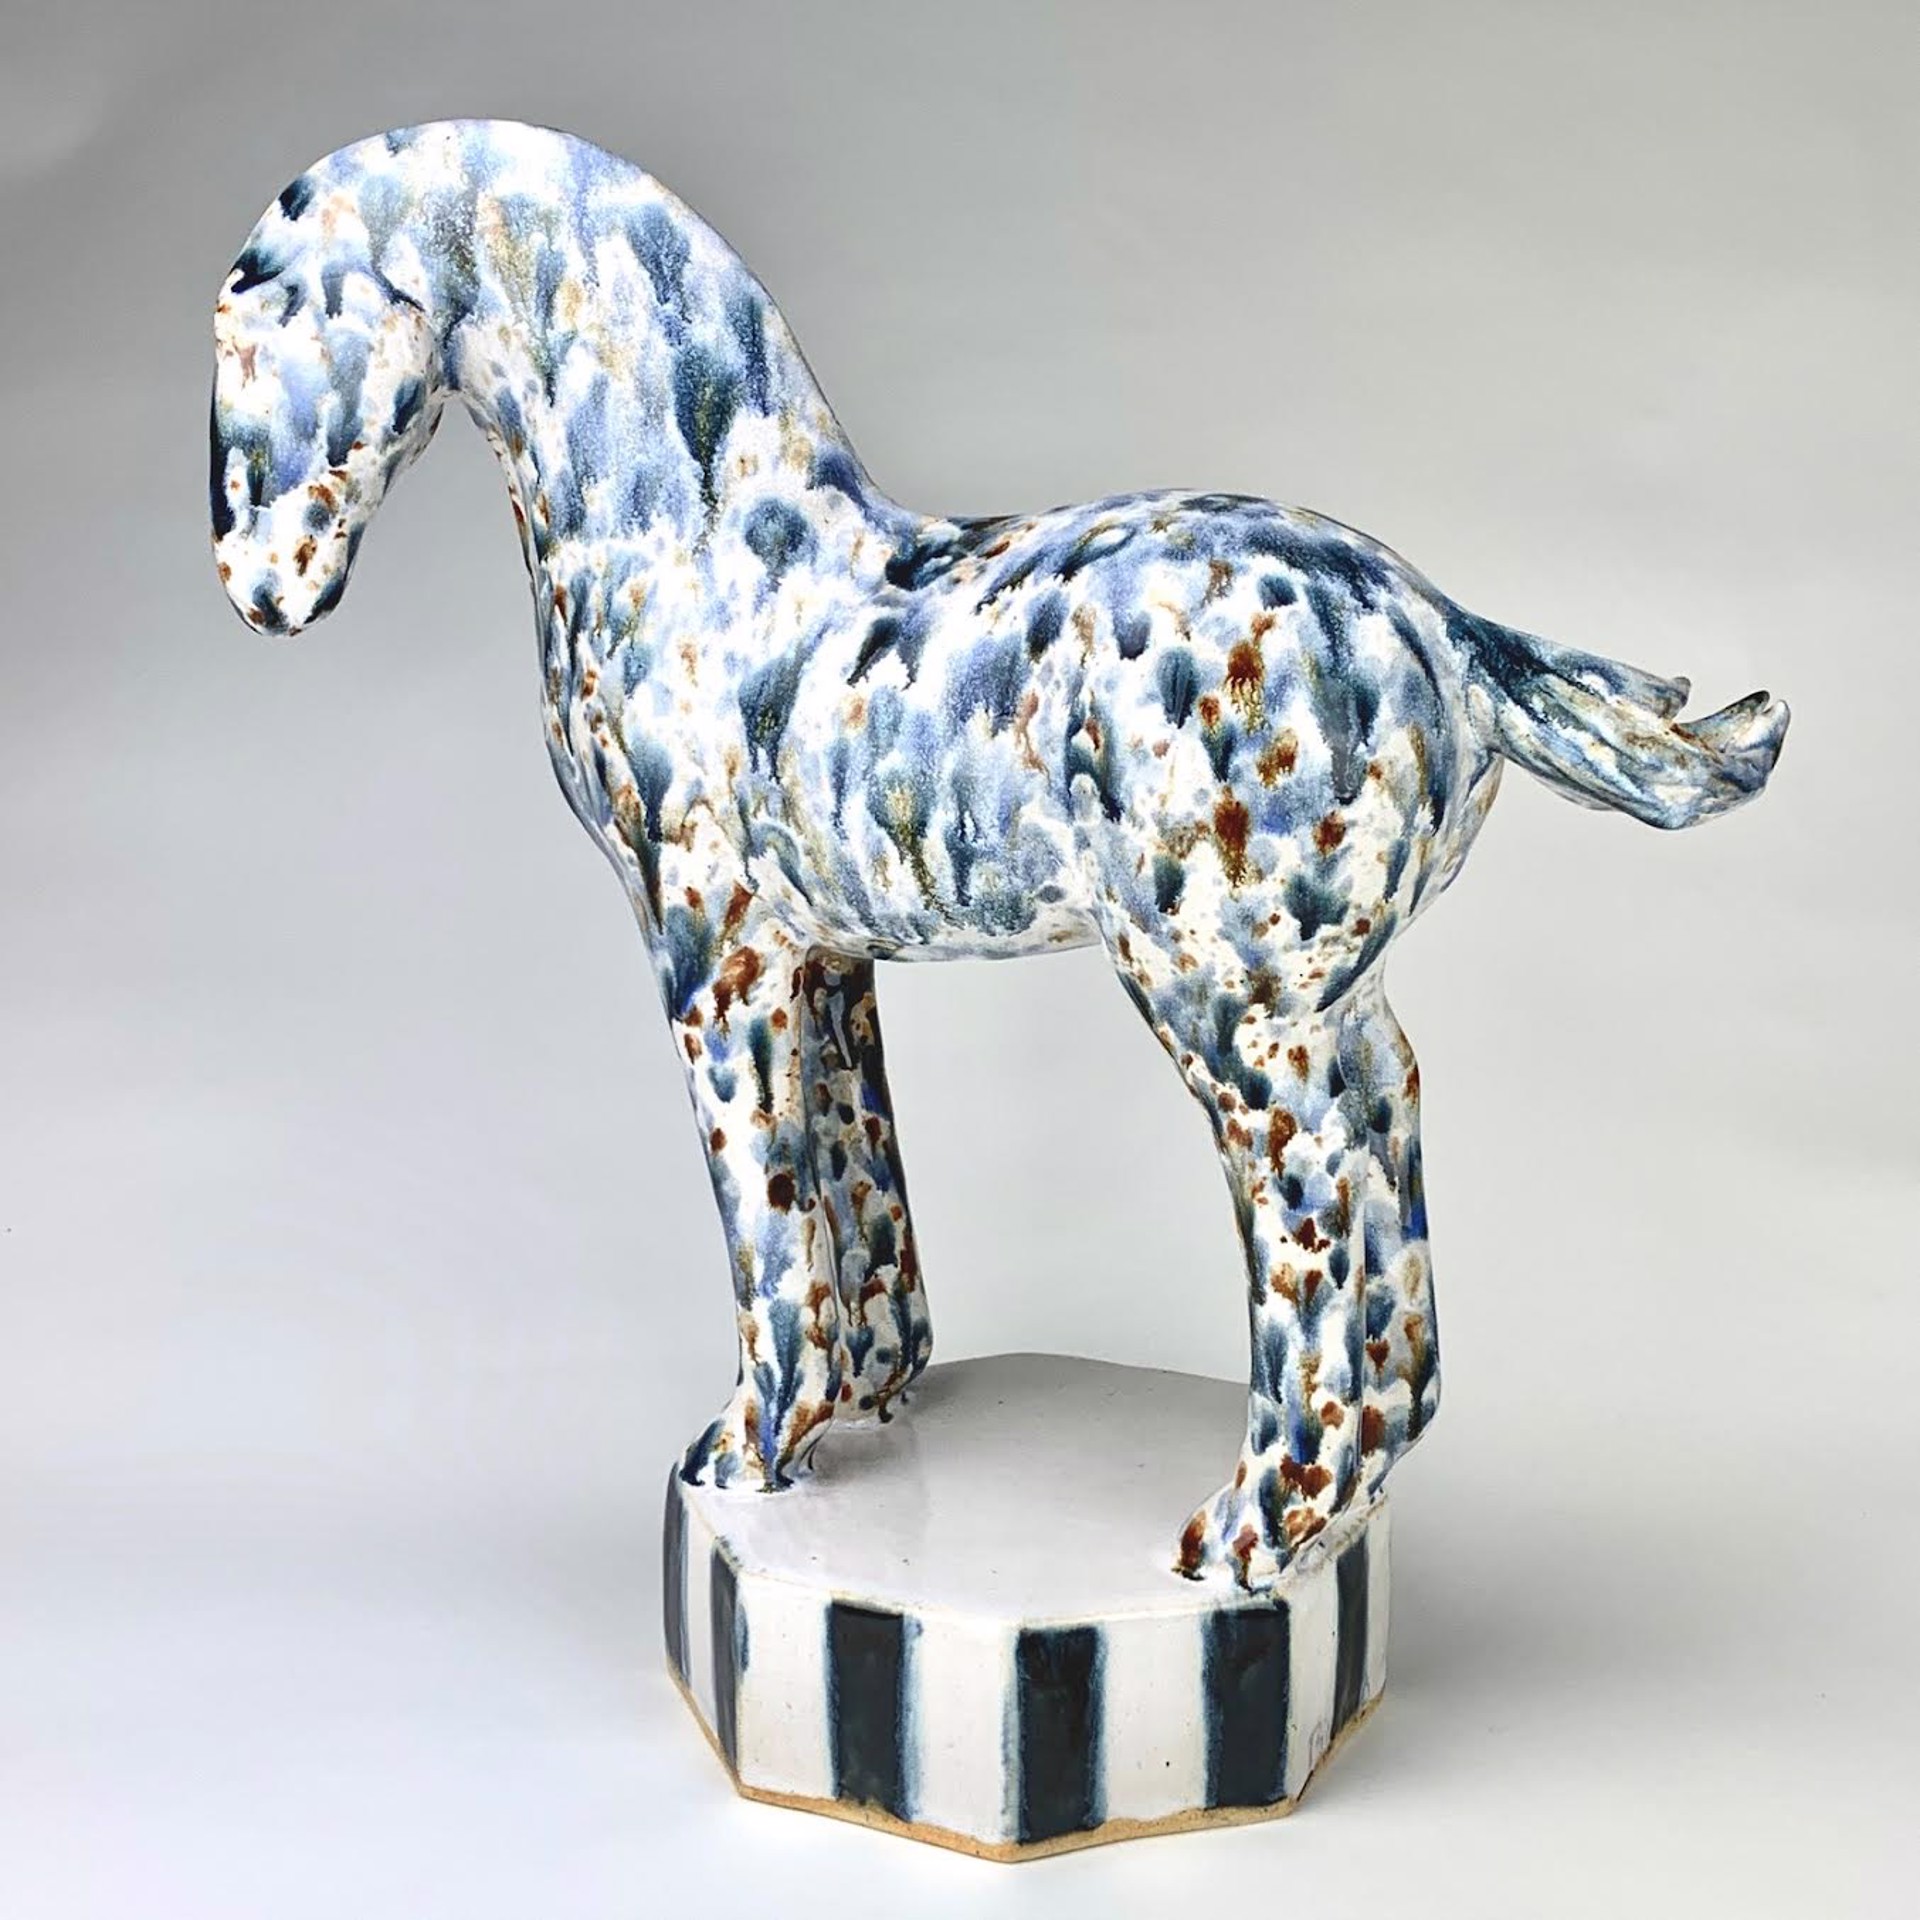 Painted Pony by Julia Burns